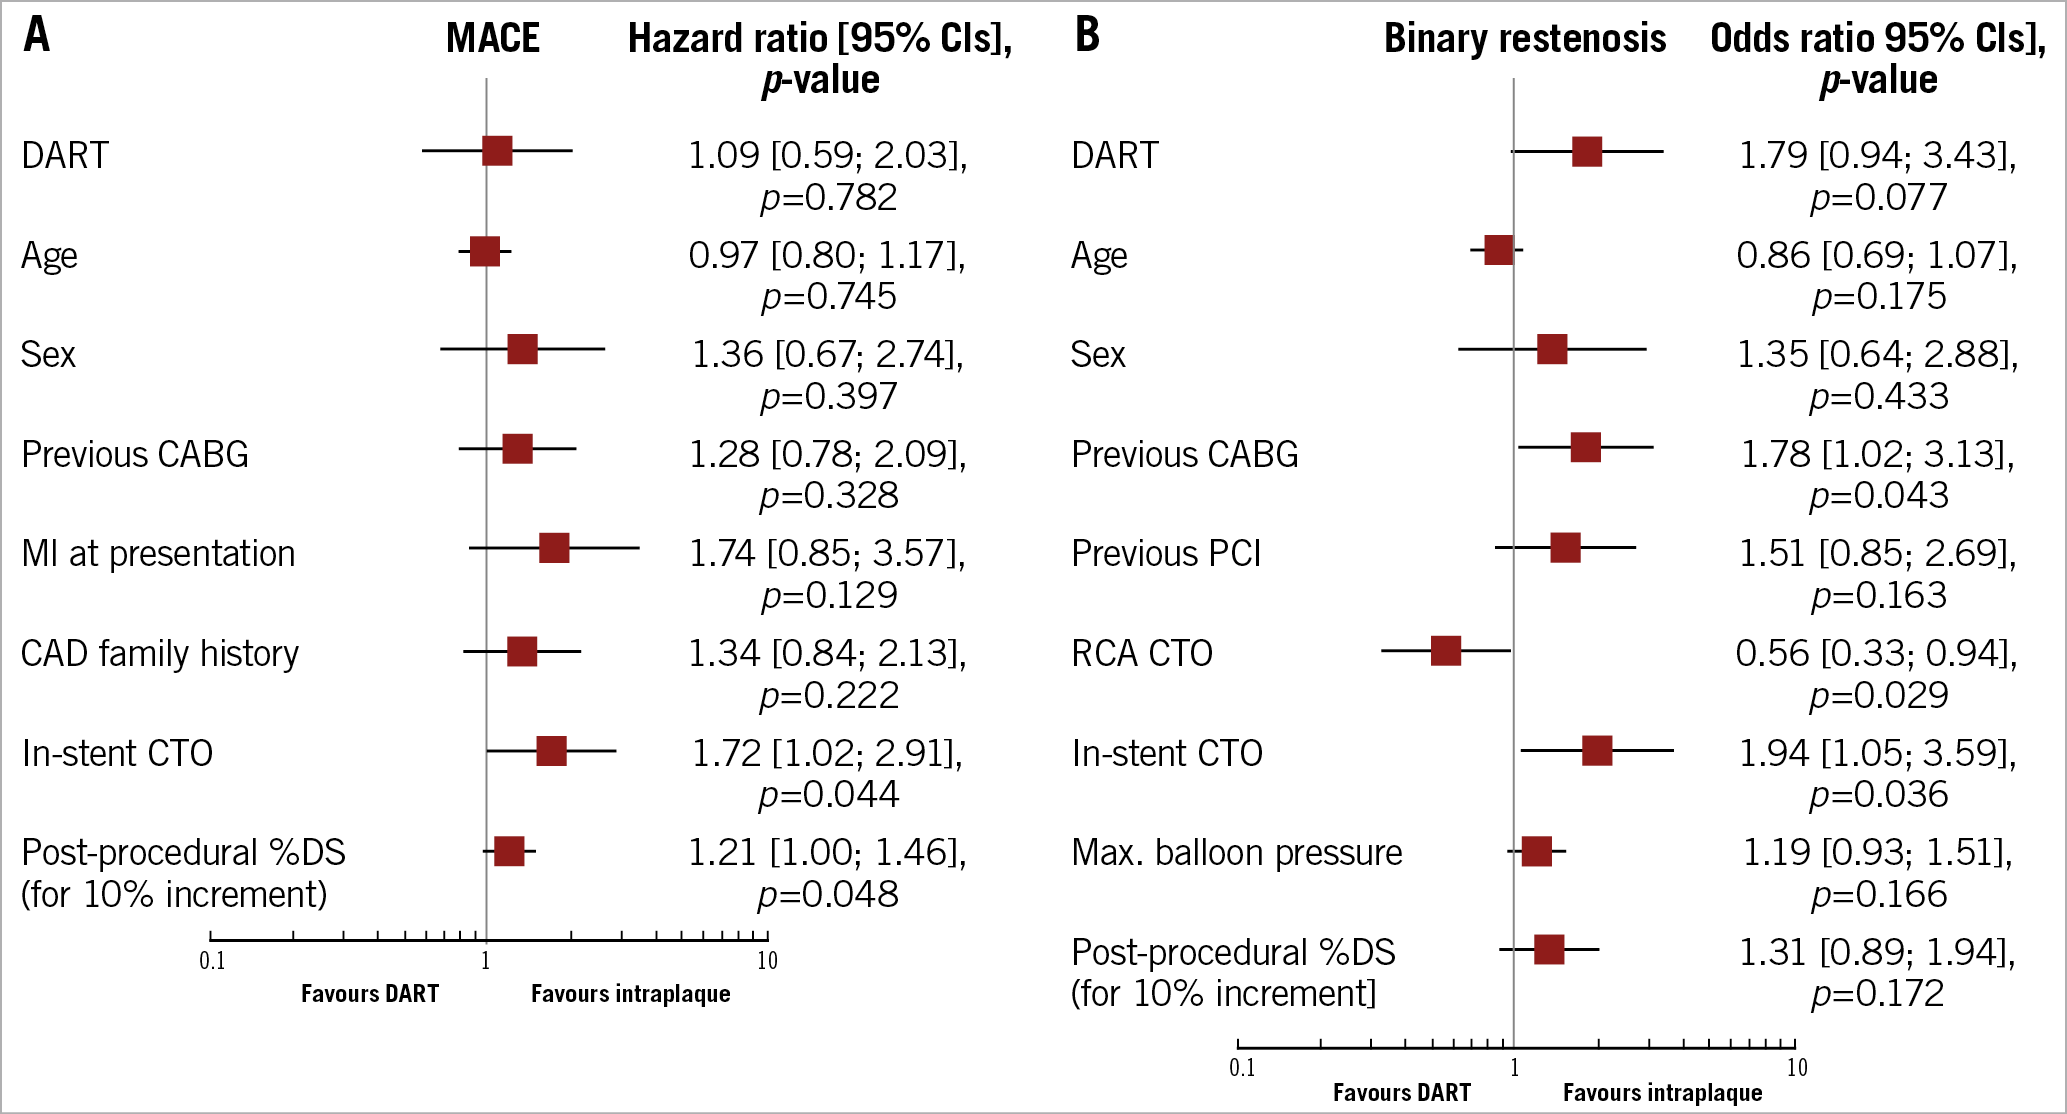 Figure 3. Multivariable analysis for predictors of MACE and binary restenosis. A) Plot of hazard ratios associated with MACE. B) Plot of odds ratios associated with binary restenosis. The squares indicate the point estimate and the left and right ends of the lines the 95% CI. 95% CI: 95% confidence interval; CABG: coronary artery bypass grafting; CAD: coronary artery disease; CTO: chronic total occlusion; DART: dissection and re-entry technique; MACE: major adverse cardiac events; MI: myocardial infarction; %DS: percent diameter stenosis; PCI: percutaneous coronary intervention